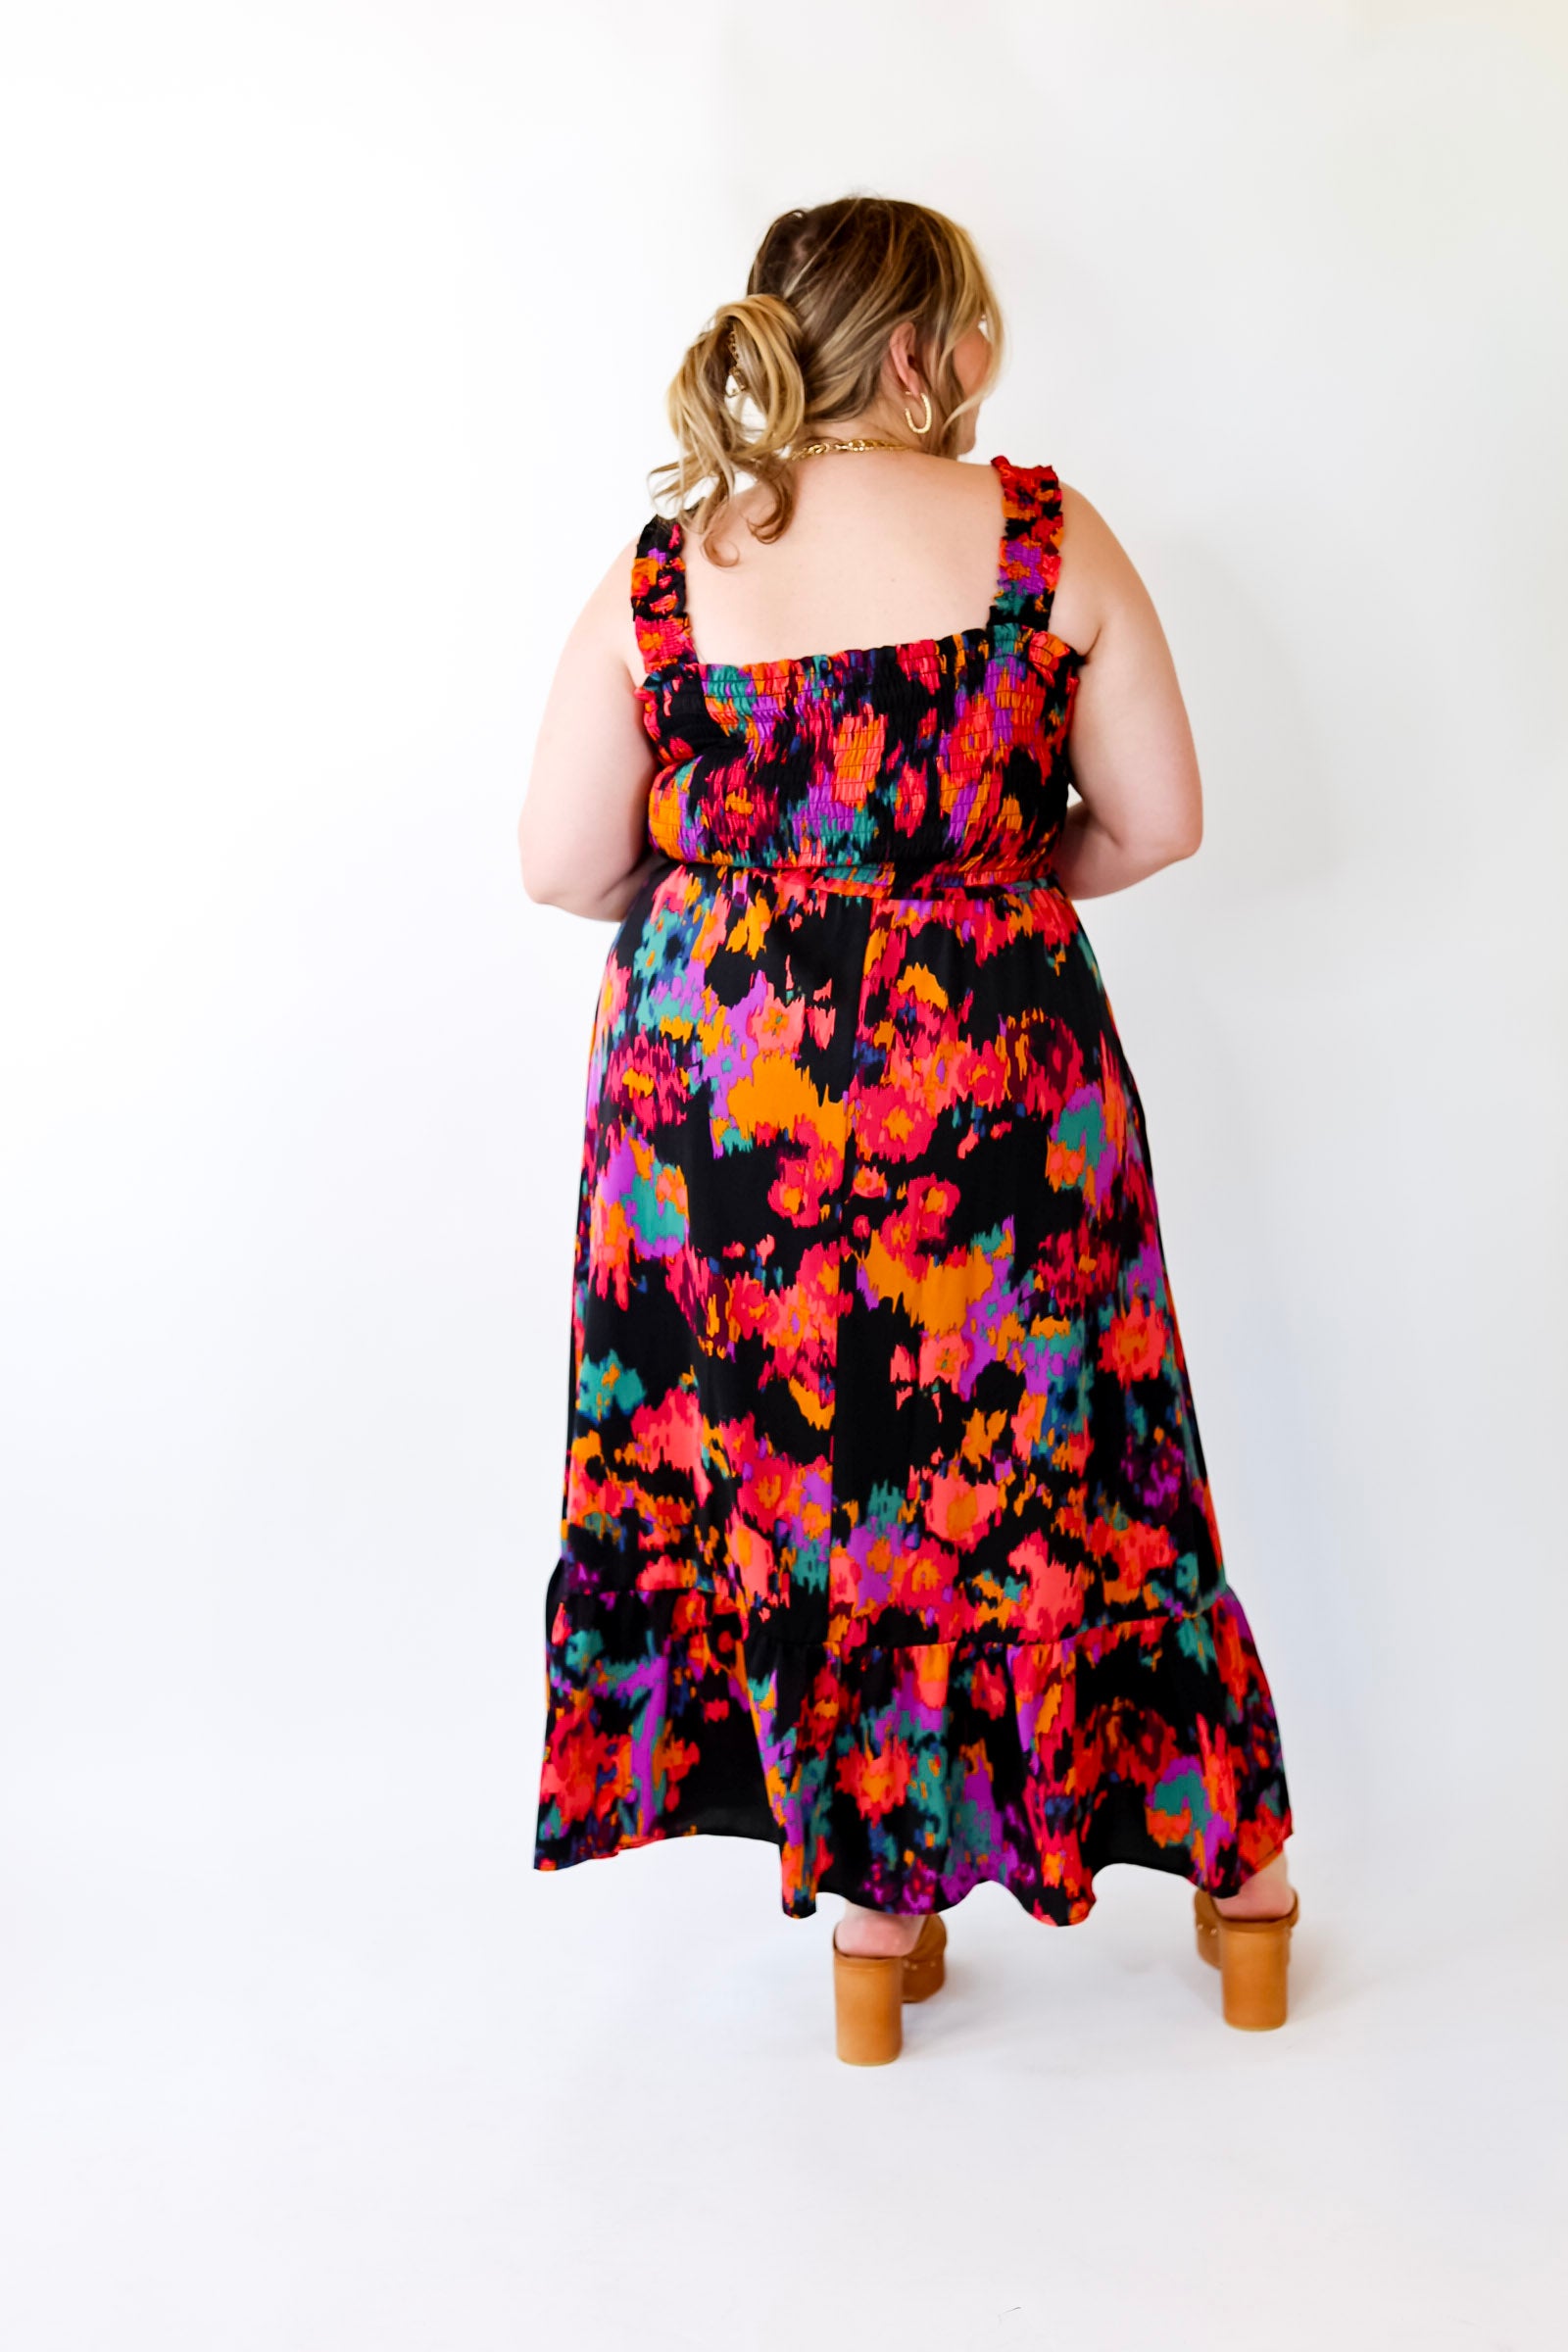 My Night Out Smocked Bodice Dress with Multicolor Abstract Print in Black - Giddy Up Glamour Boutique